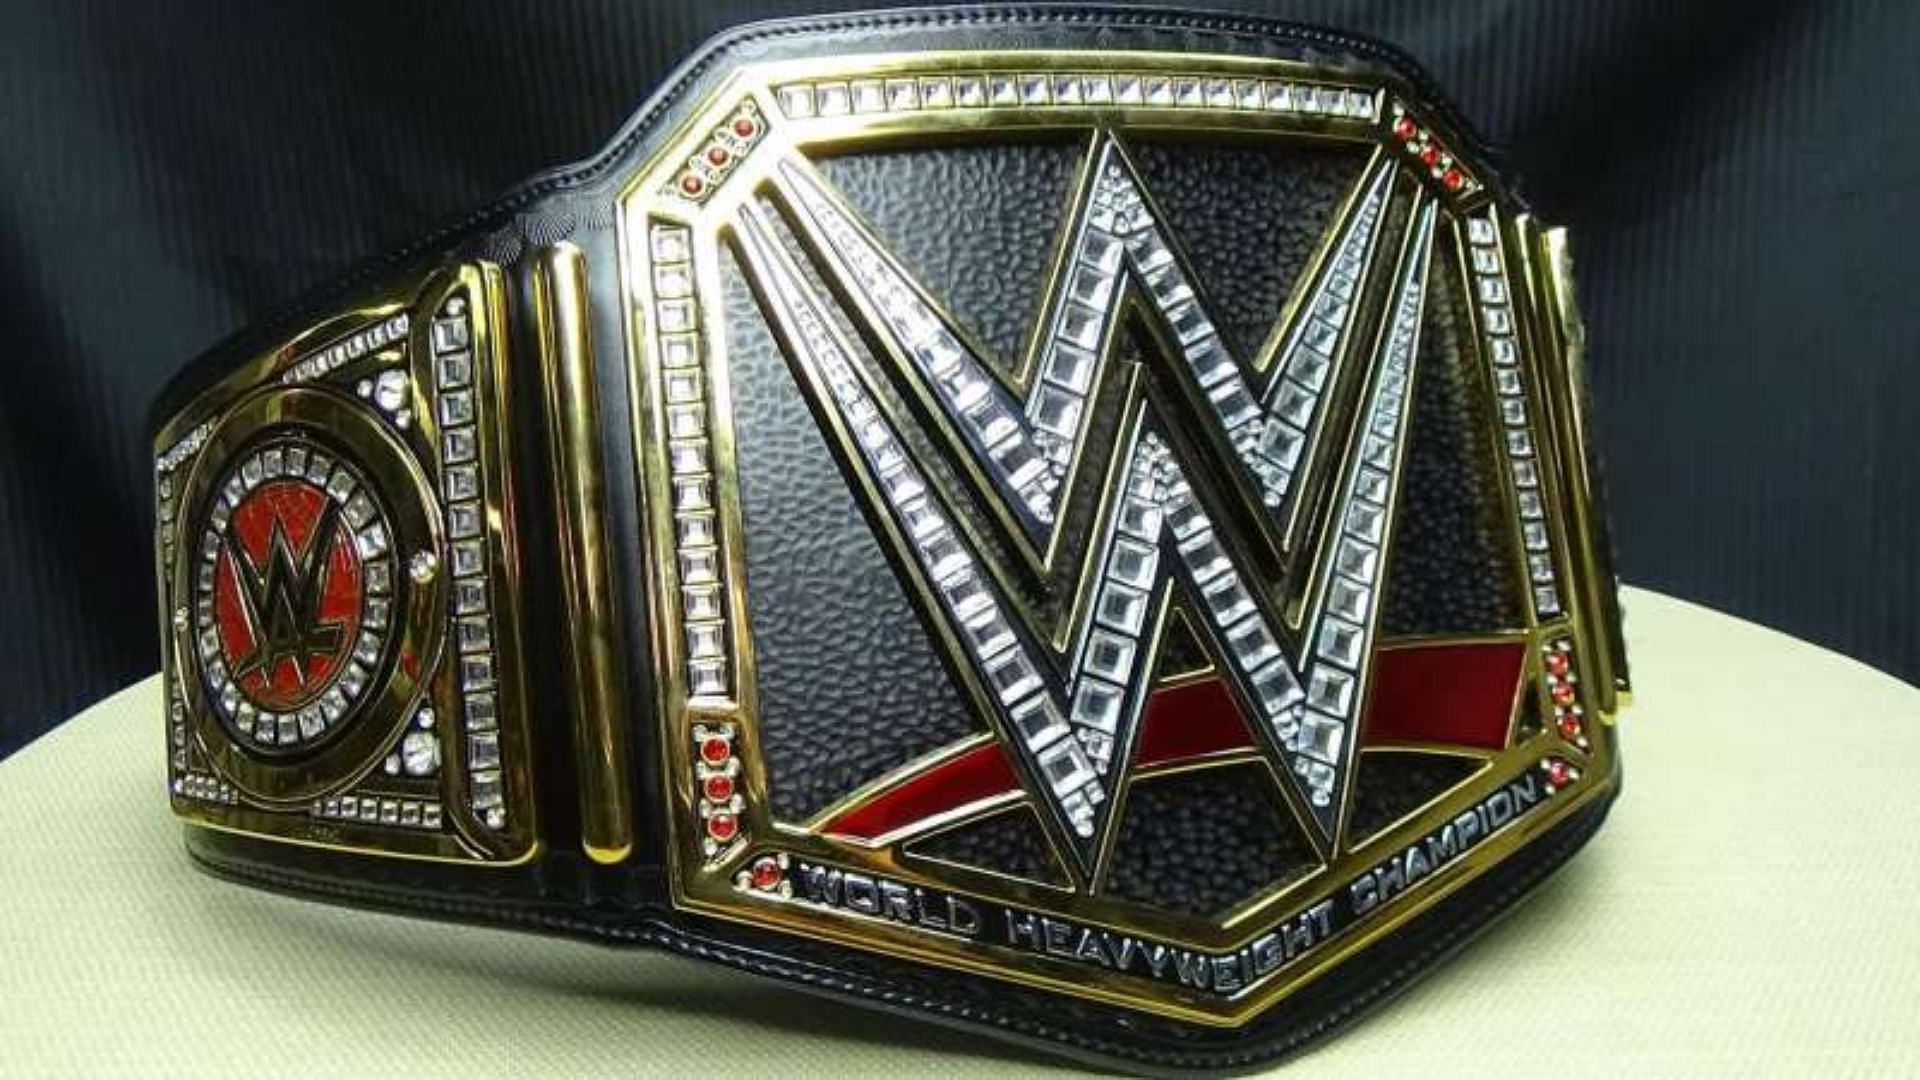 The oldest championship belt in WWE history